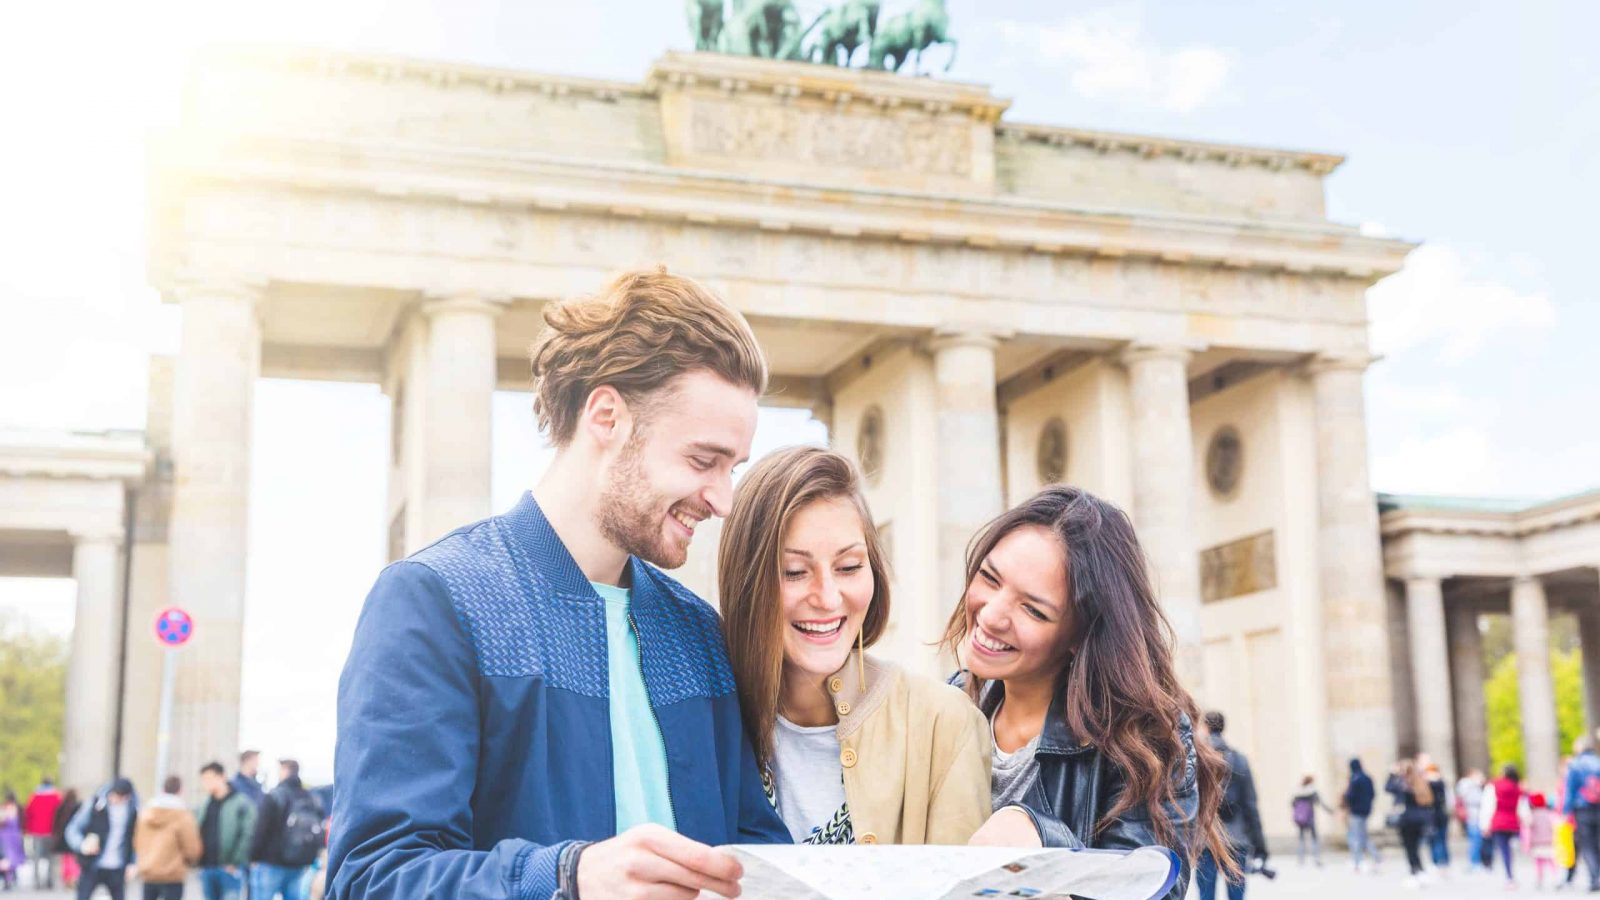 Multiracial group of friends visiting the city of Berlin. Two women and a man looking at a map with Brandenburg Gate on background. Lifestyle, friendship and tourism concepts with real people models.